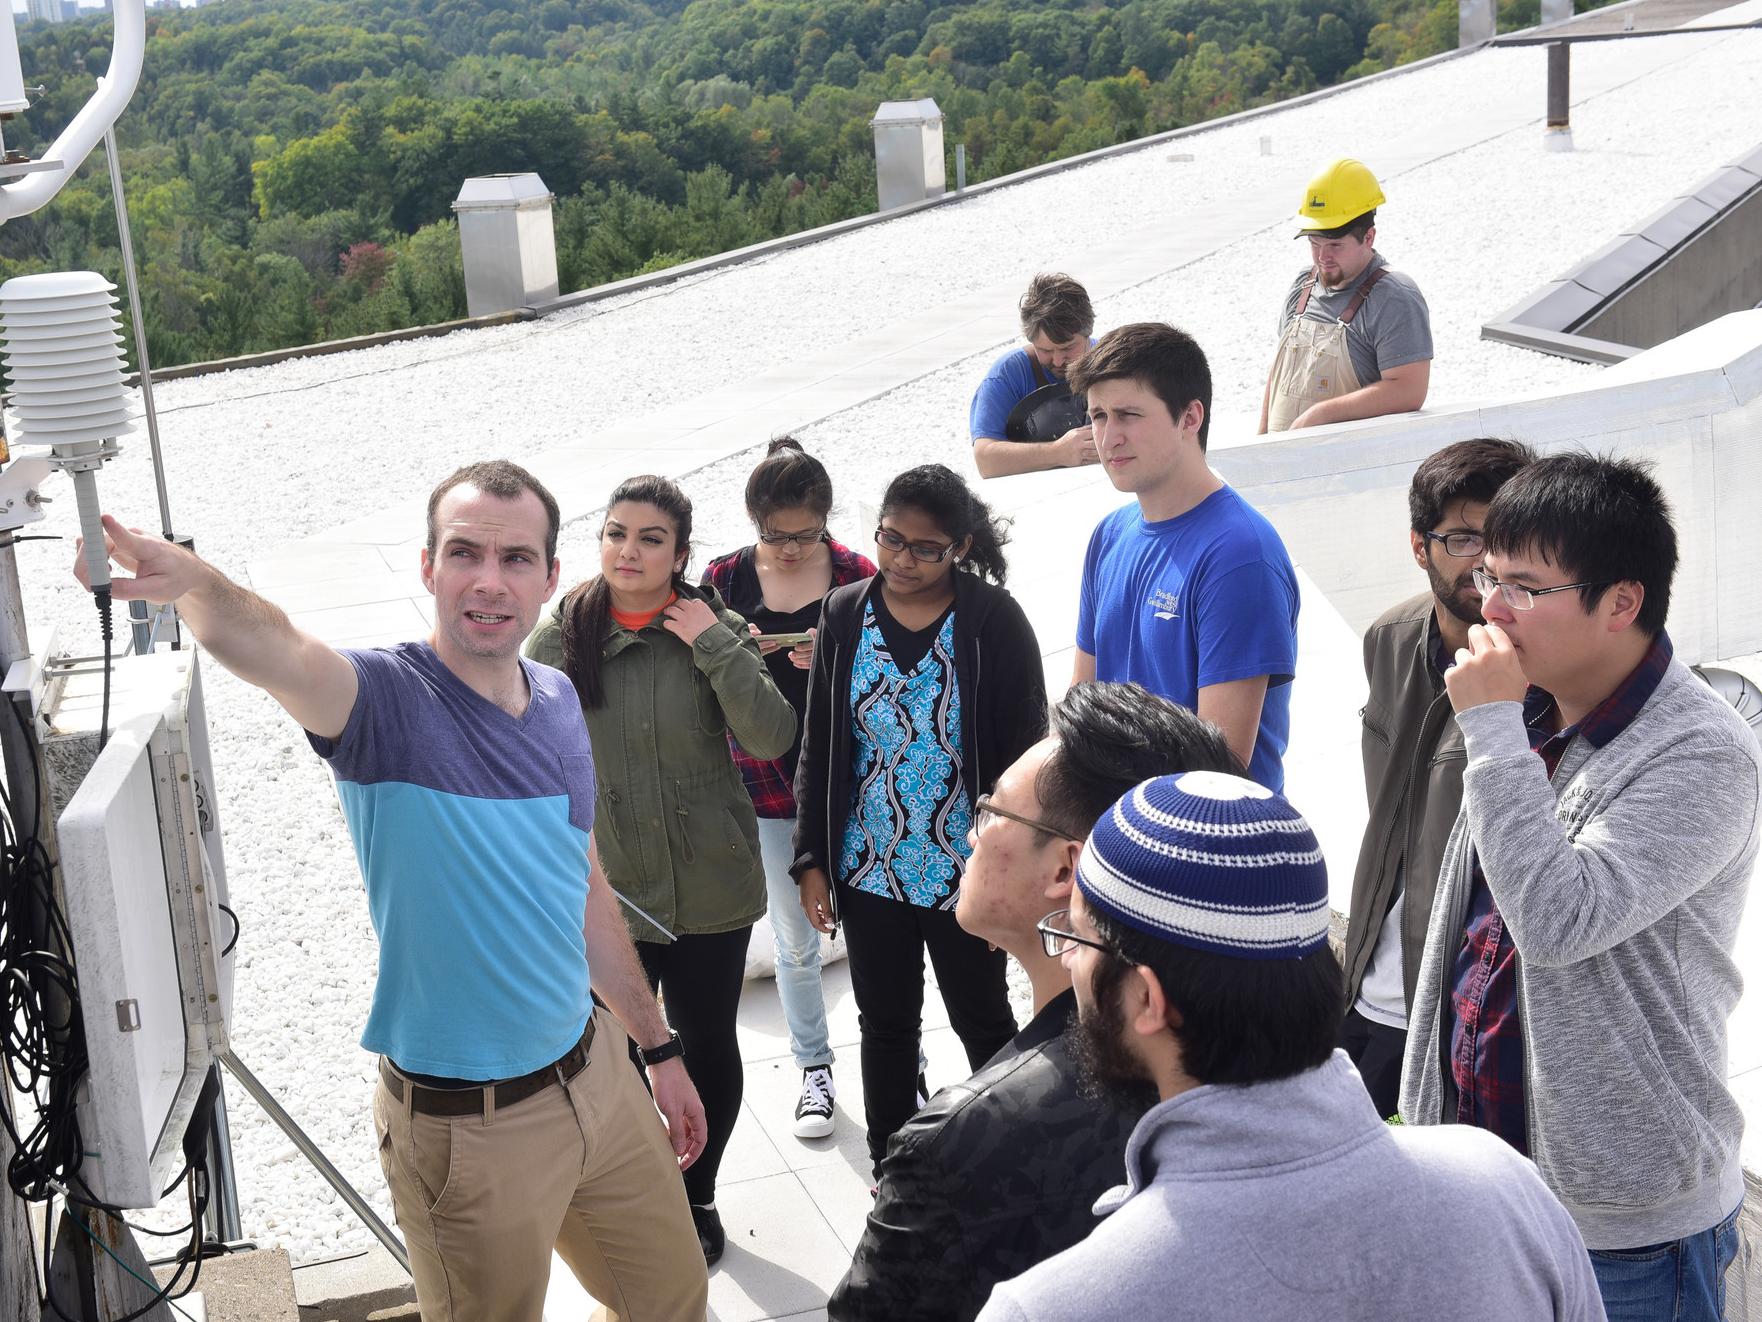 A group of students on a field trip to a weather station, on a roof examining a weather vane